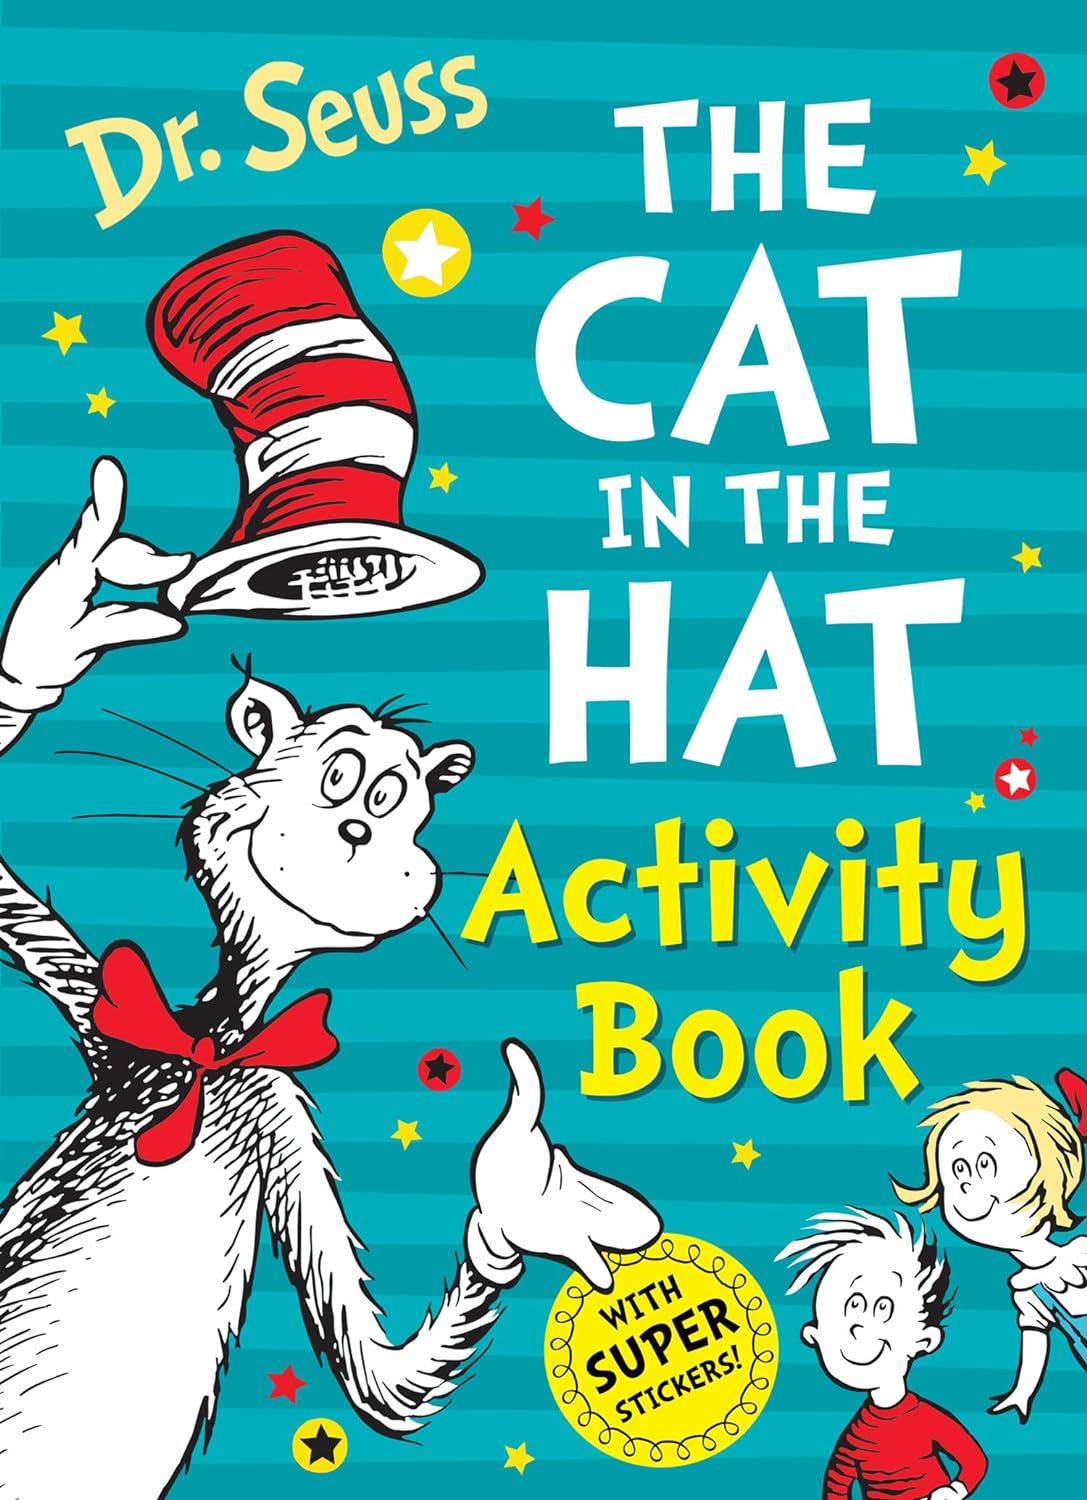 The Cat in the Hat Activity Book